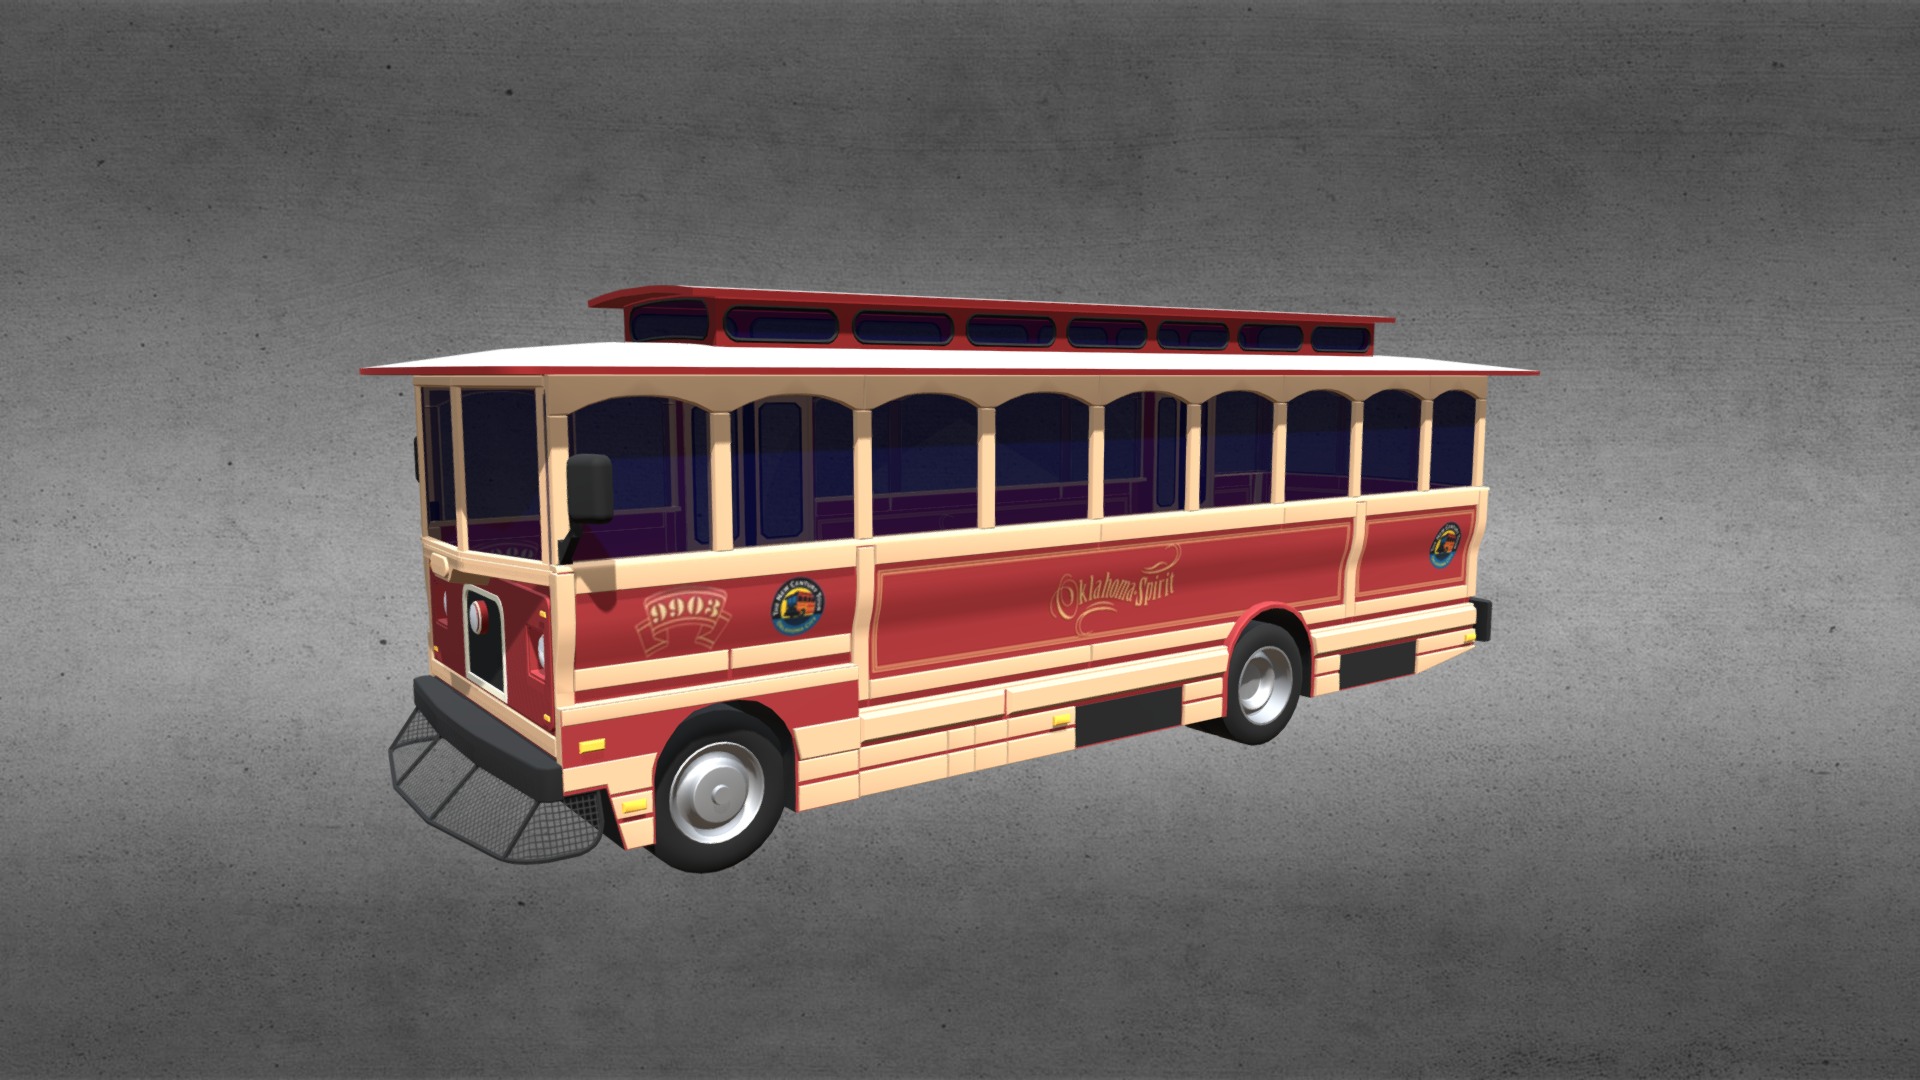 3D model Trolley - This is a 3D model of the Trolley. The 3D model is about a red and white bus.